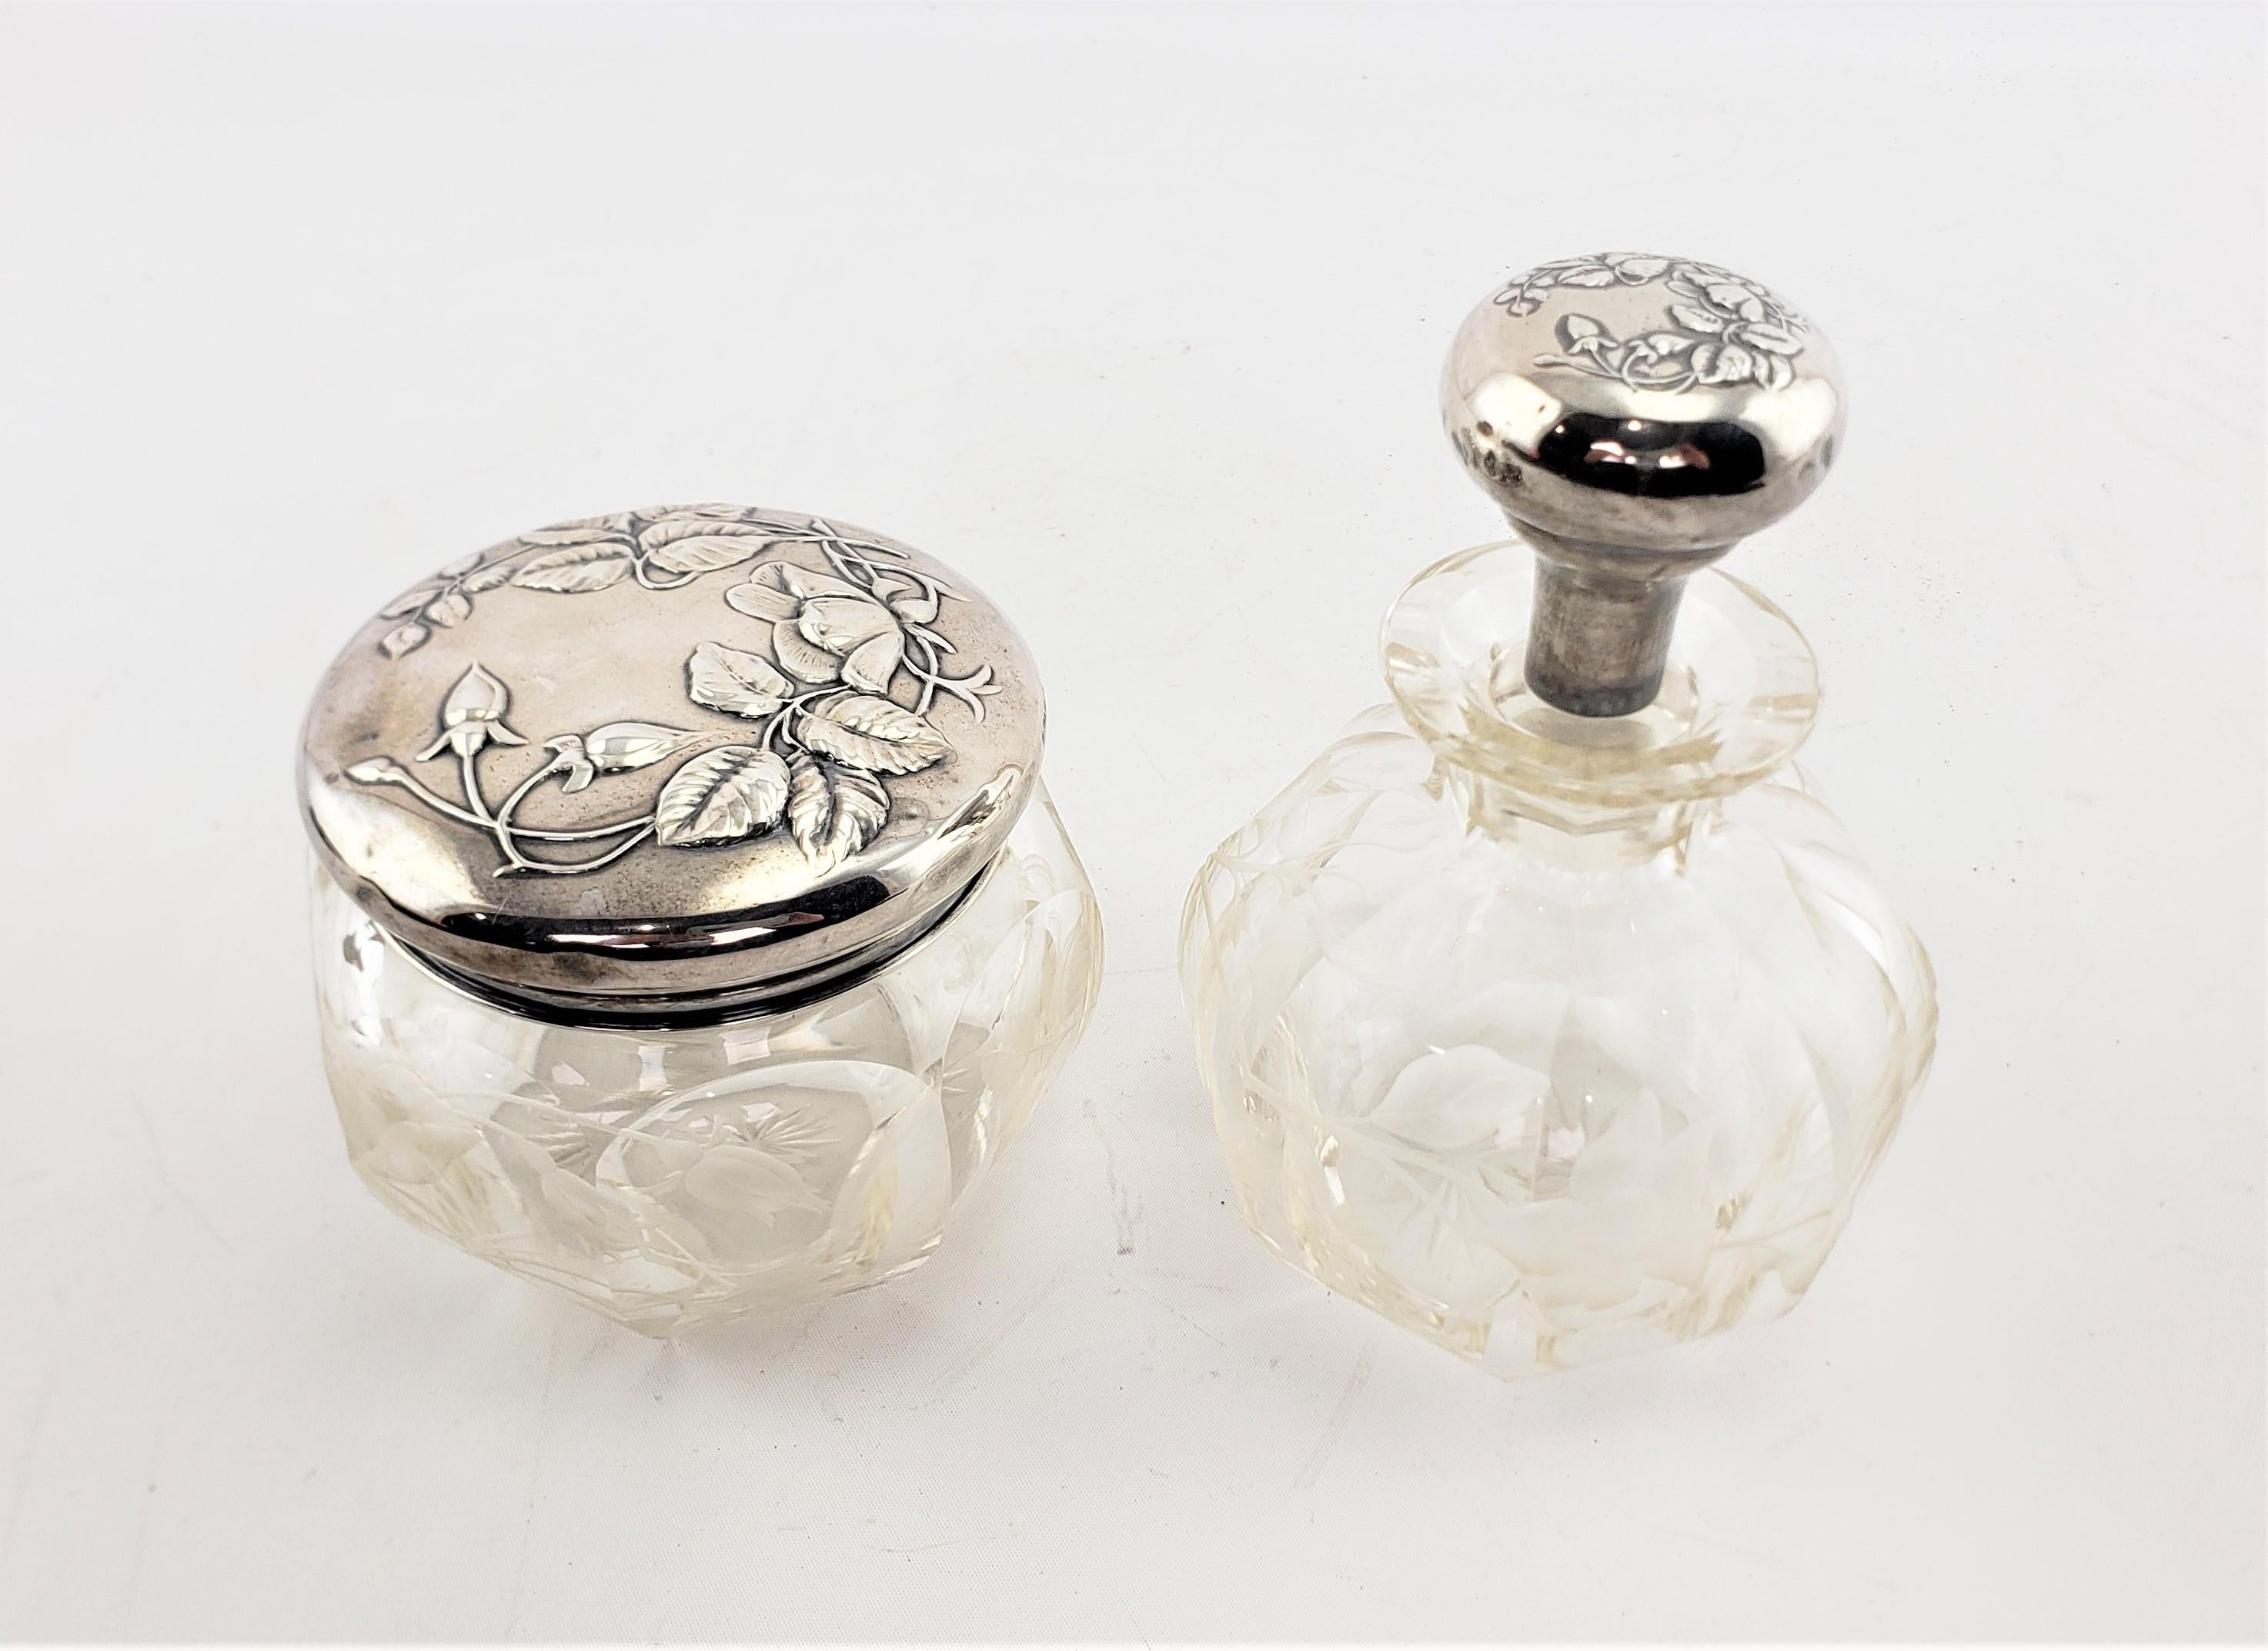 Antique Sterling Silver Topped Dresser Bottle & Jar Set with Etched Decoration In Good Condition For Sale In Hamilton, Ontario